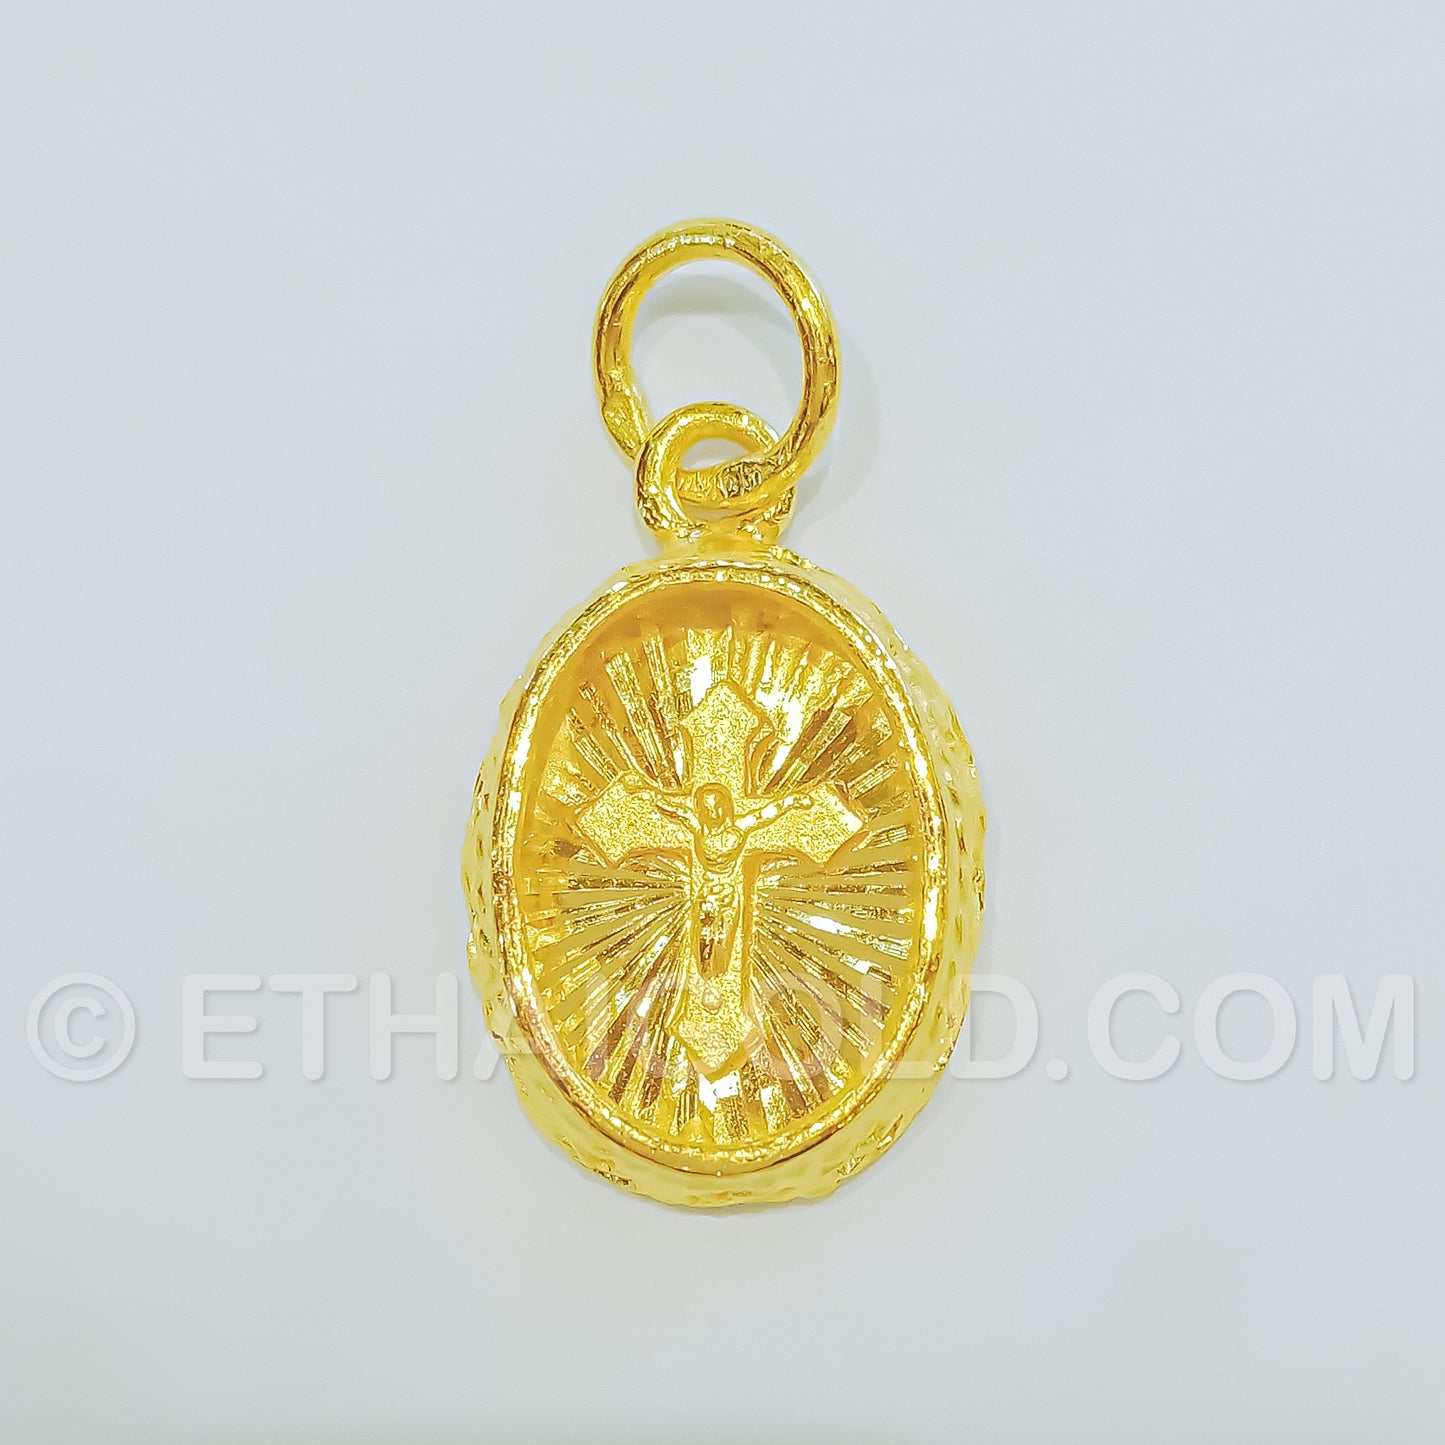 1/4 BAHT POLISHED MATTE DIAMOND-CUT SOLID OVAL-CASE CRUCIFIX CHRISTIAN PENDANT IN 23K GOLD (ID: P0501S)